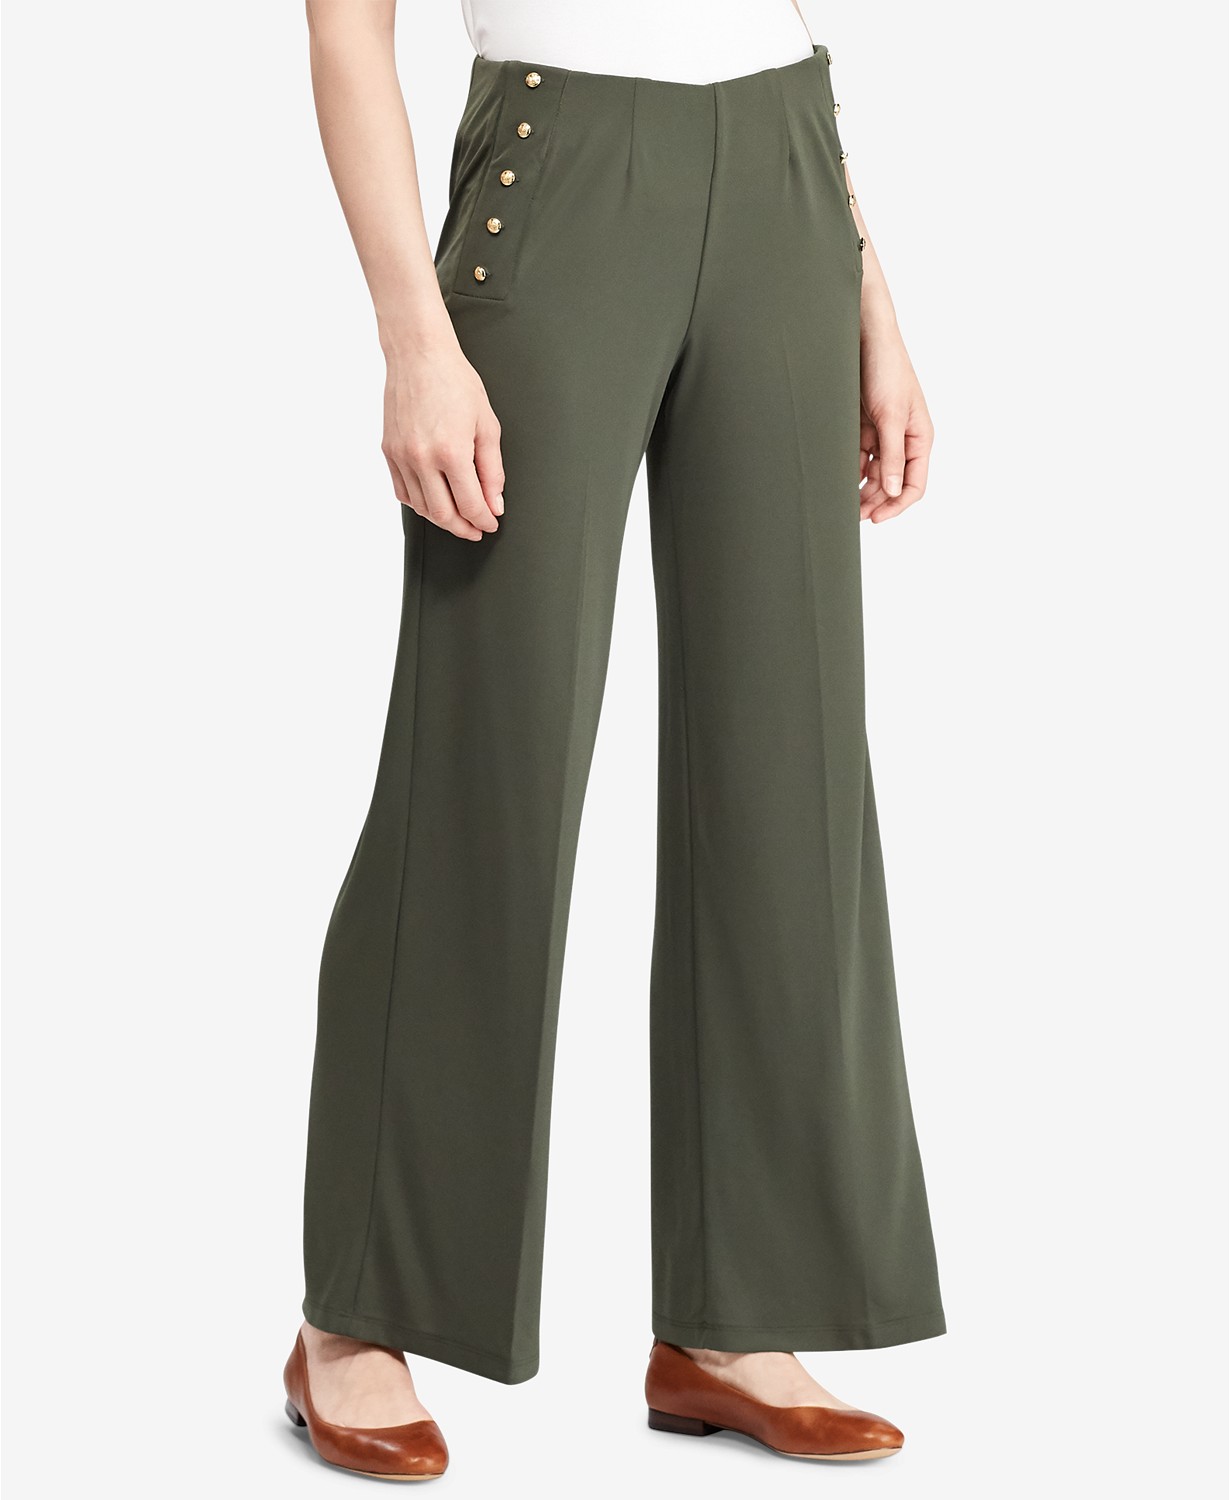 A Short Girl's Guide to How to Wear Petite Palazzo Pants